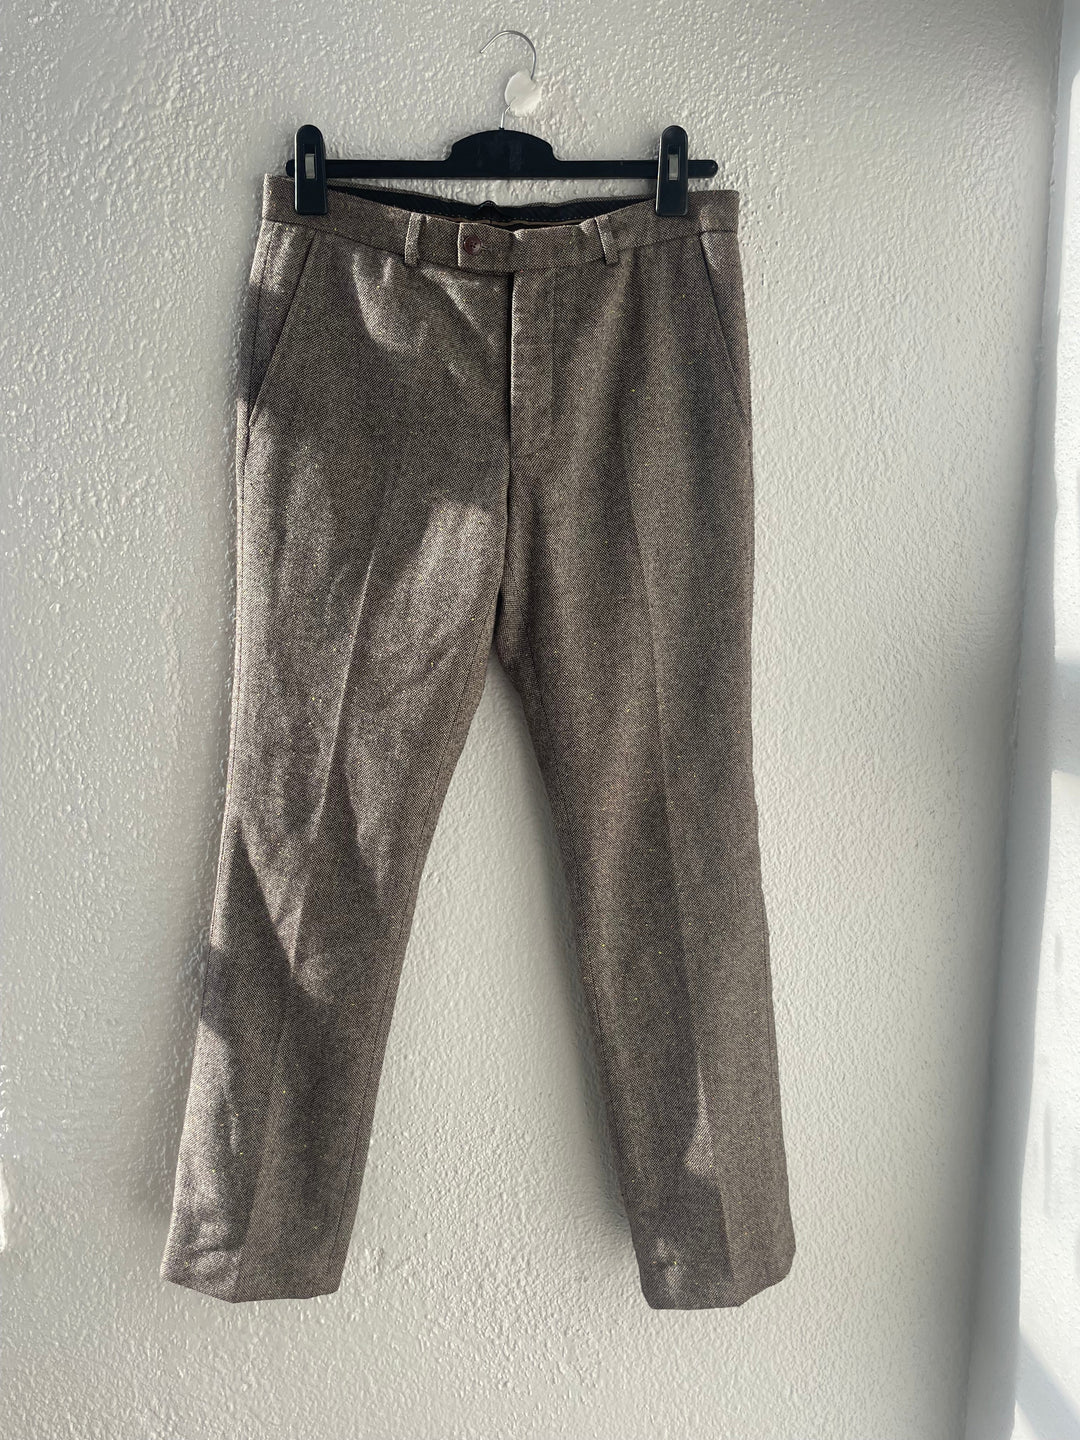 Image of Brown textured trousers 